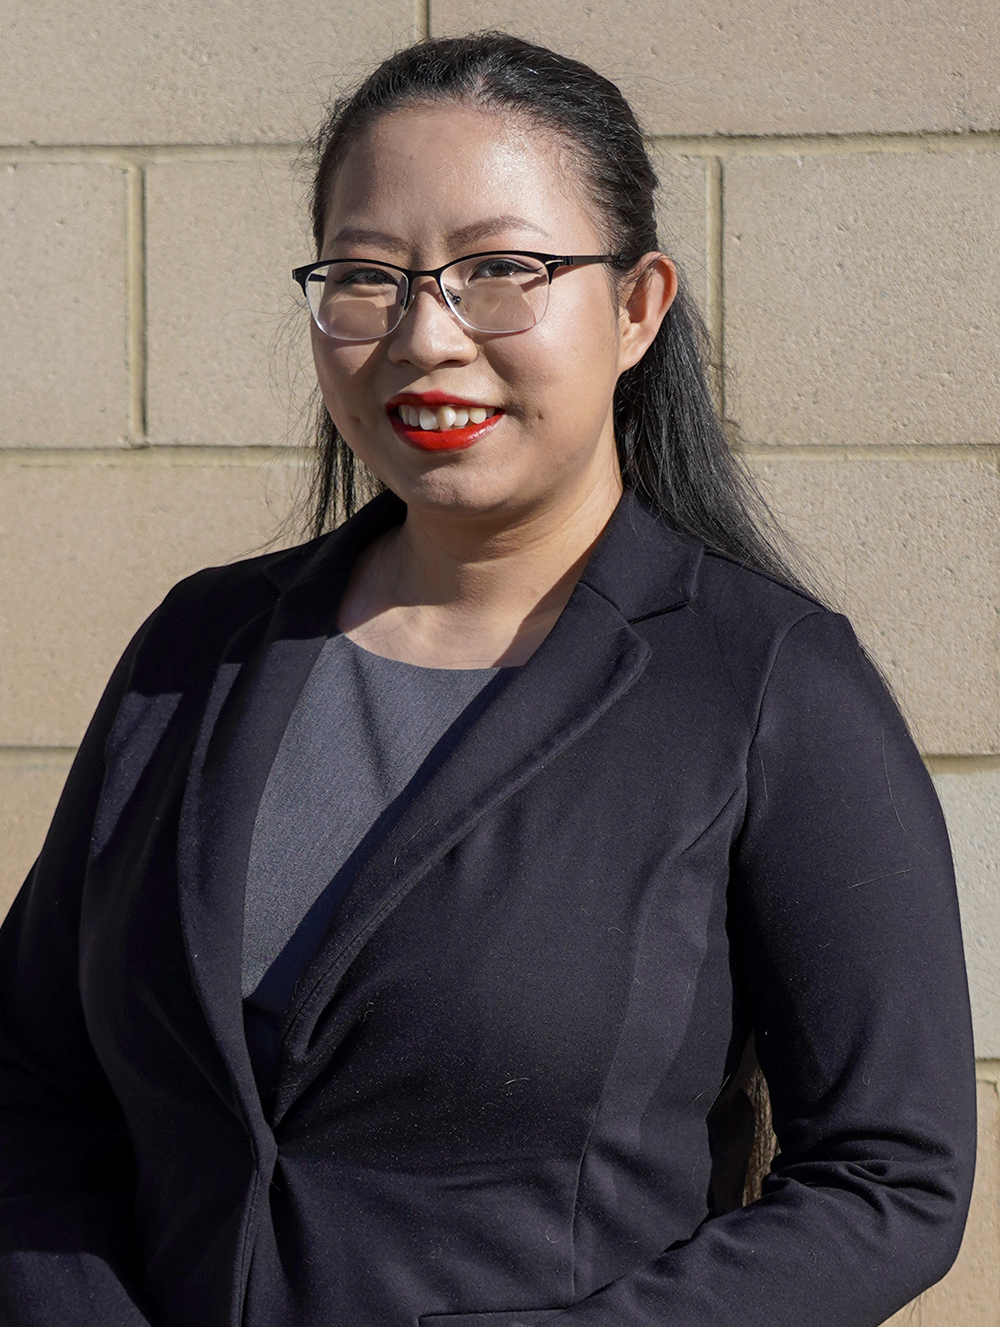 Woman in suit and glasses smiling